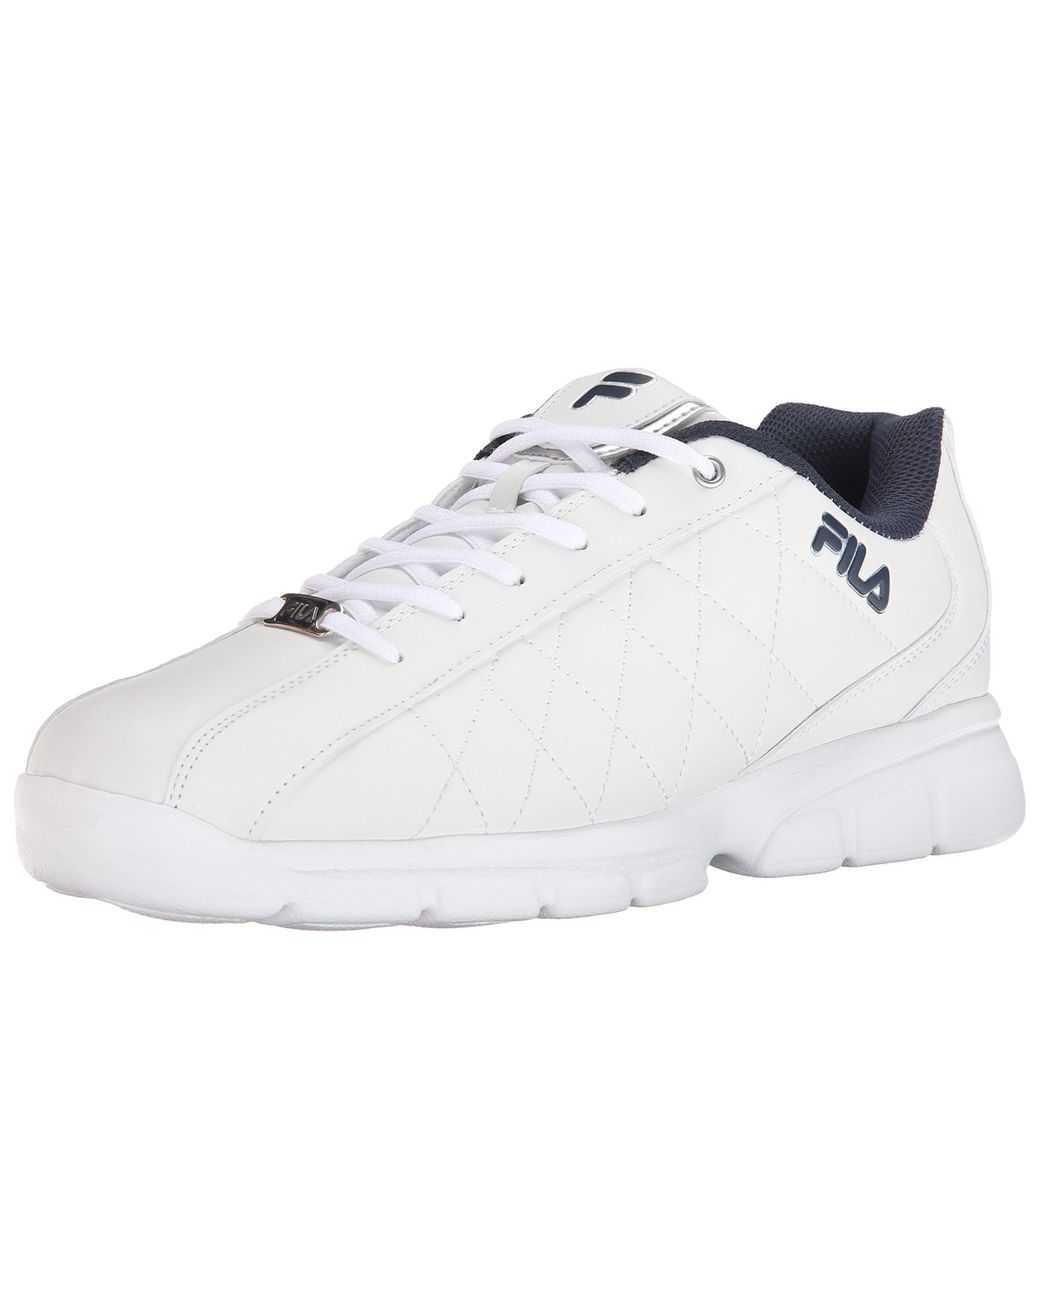 Fila Leather Fulcrum 3 Cross Trainer in White for Men - Save 21% - Lyst